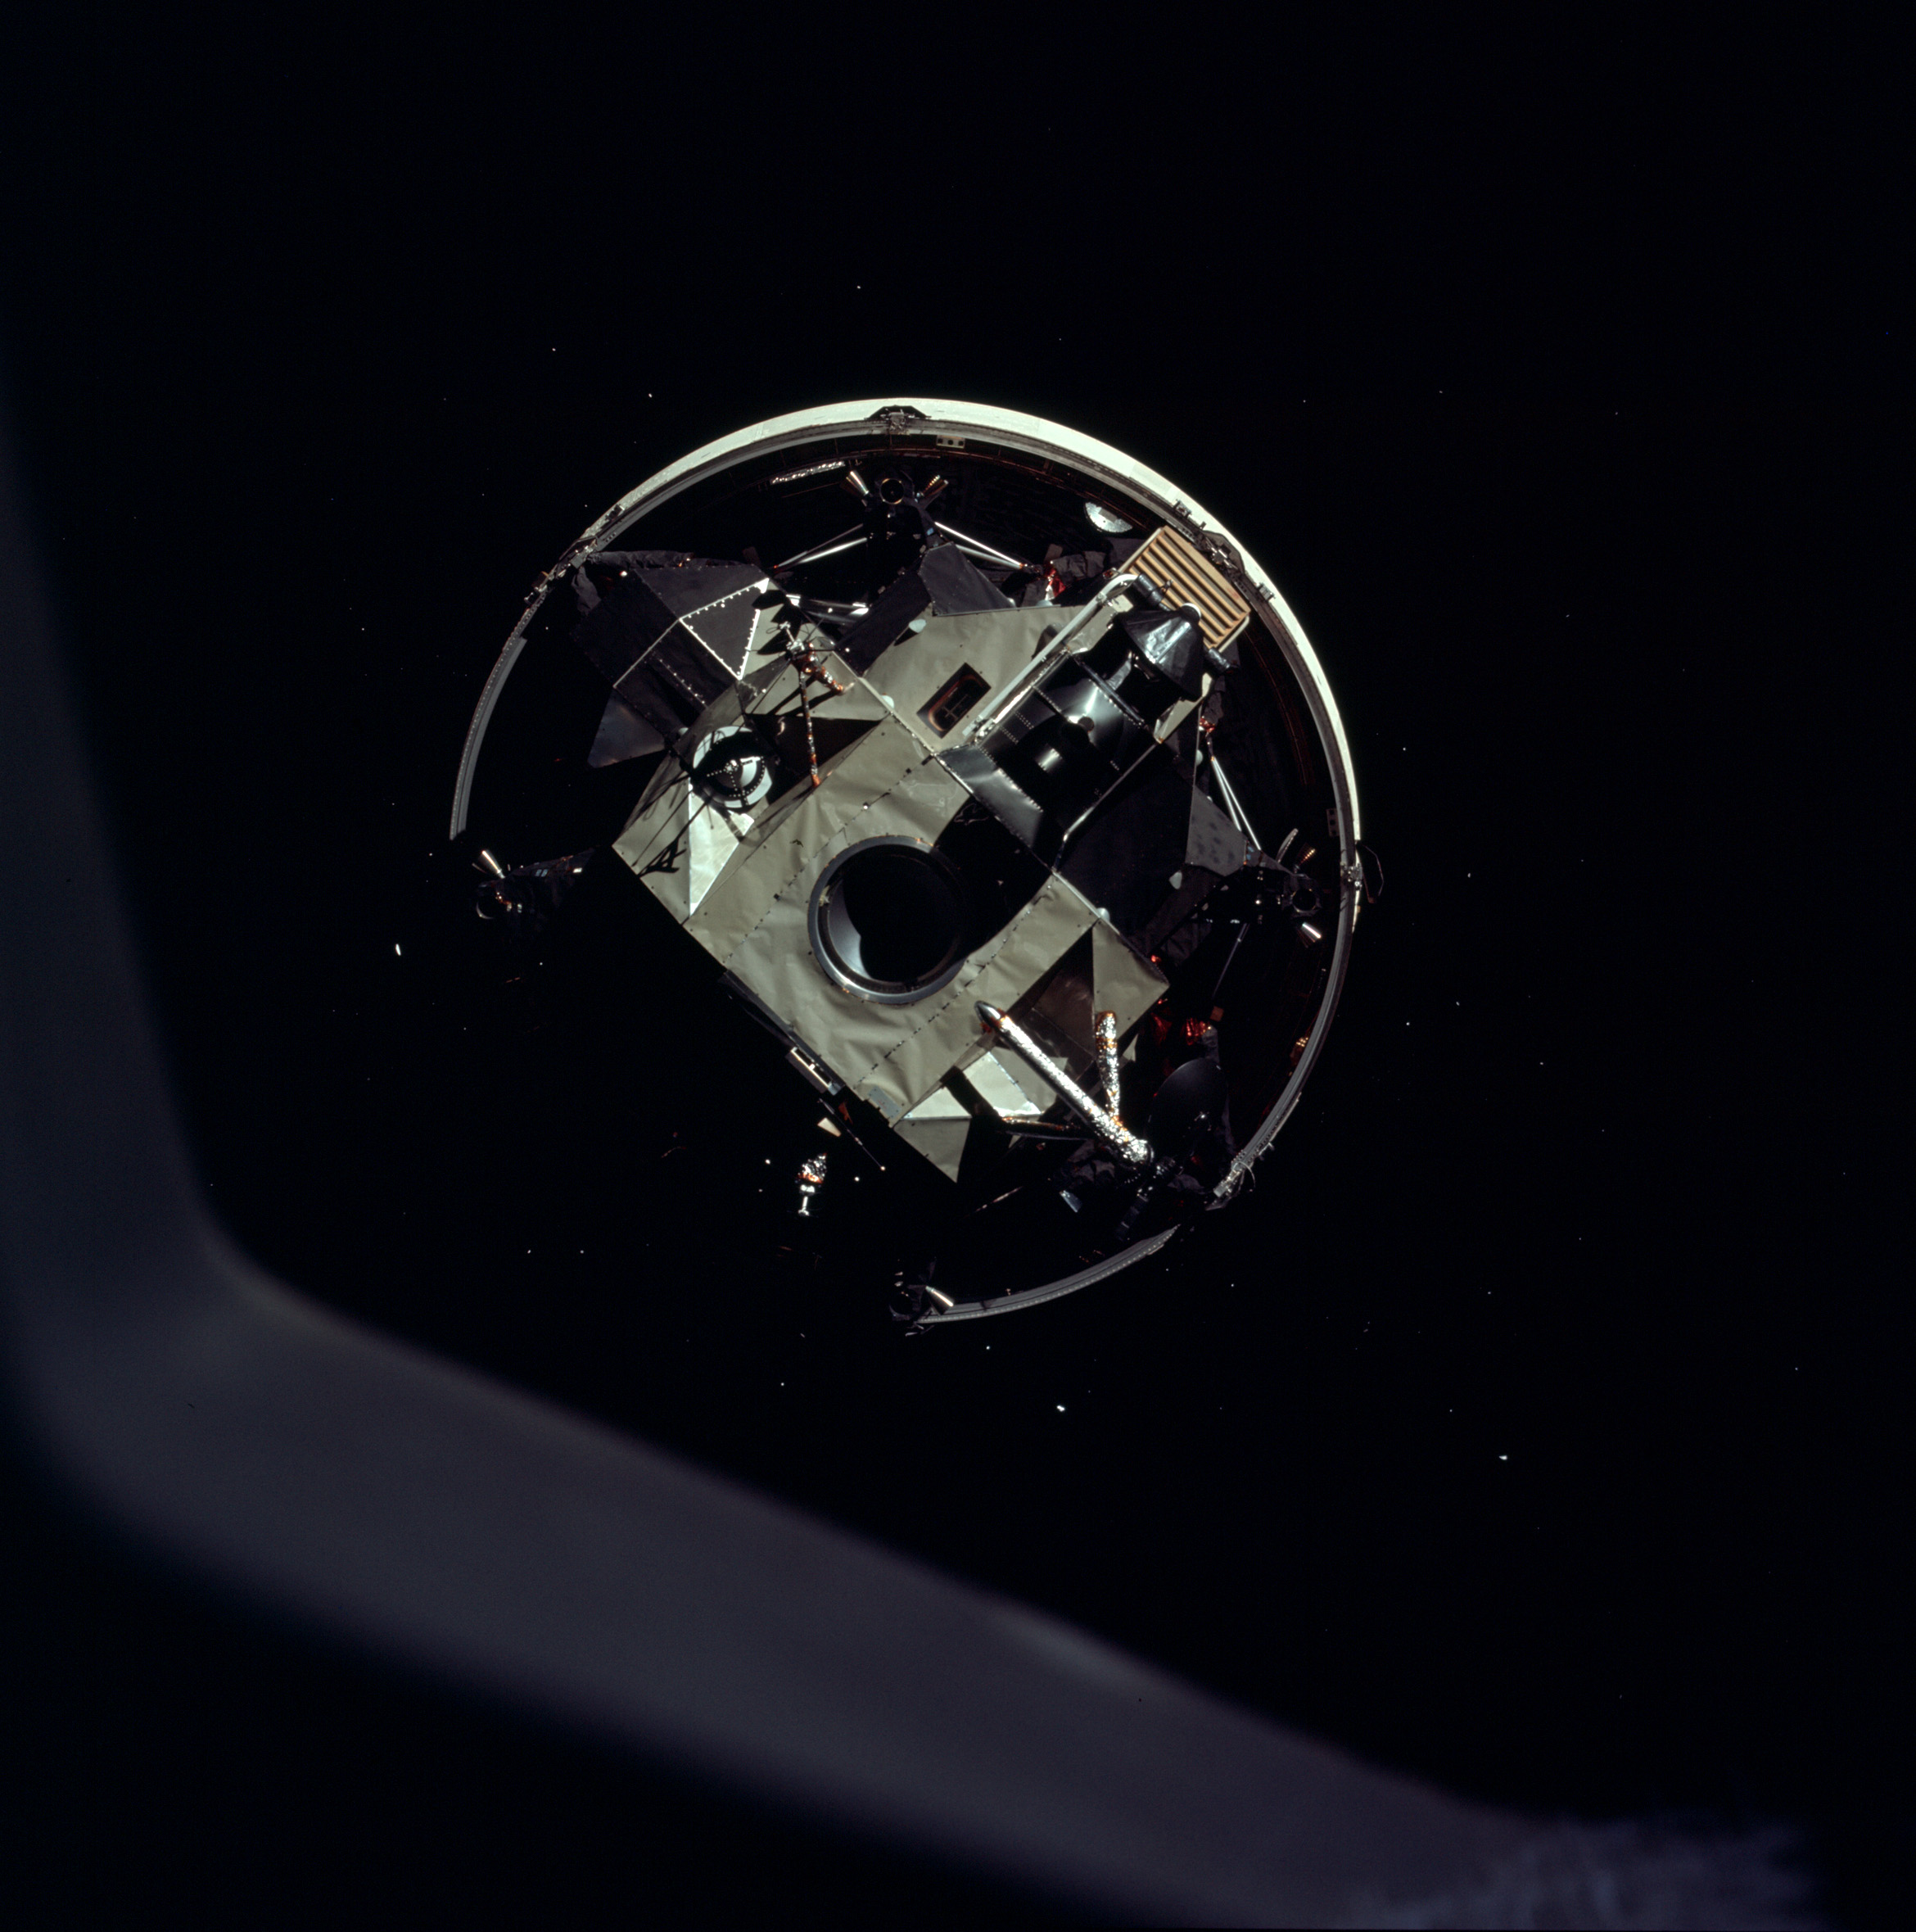 The Apollo 11 command and service module orbits the Moon shortly after jettisoning the Eagle lunar module on July 20, 1969.